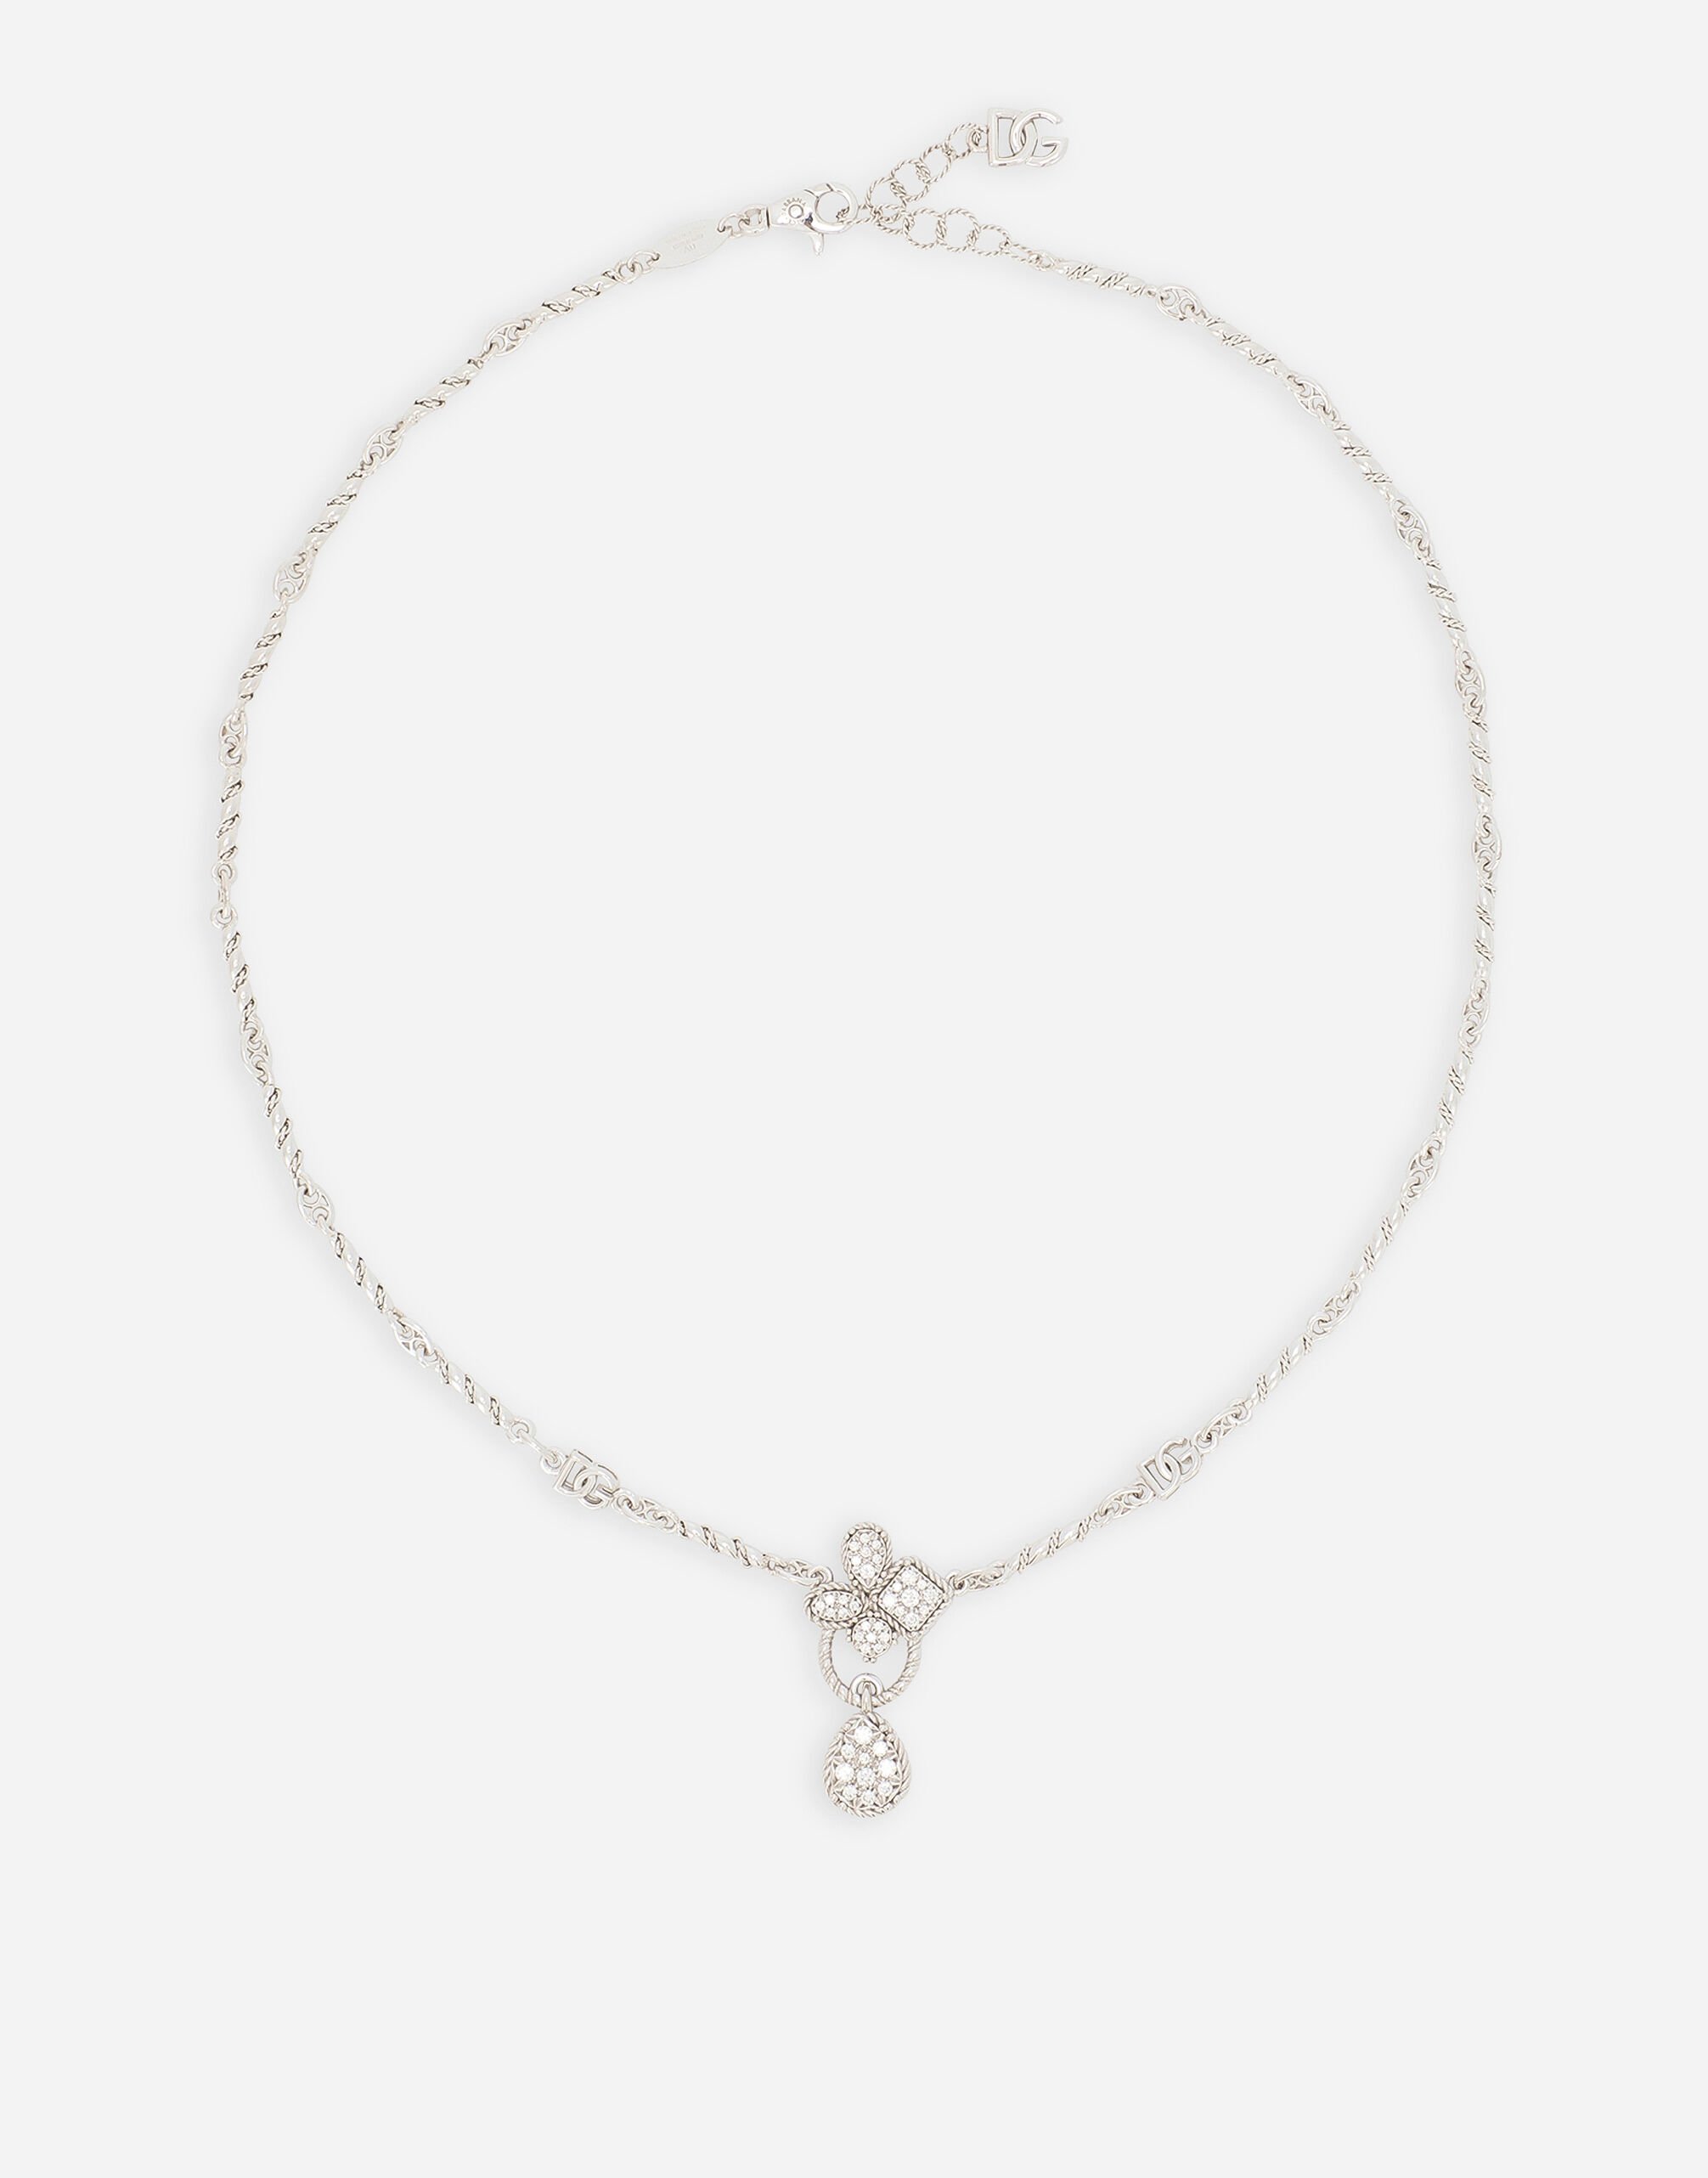 Dolce & Gabbana Easy Diamond necklace in white gold 18kt and diamonds pavé Gold WNQA3GWQC01